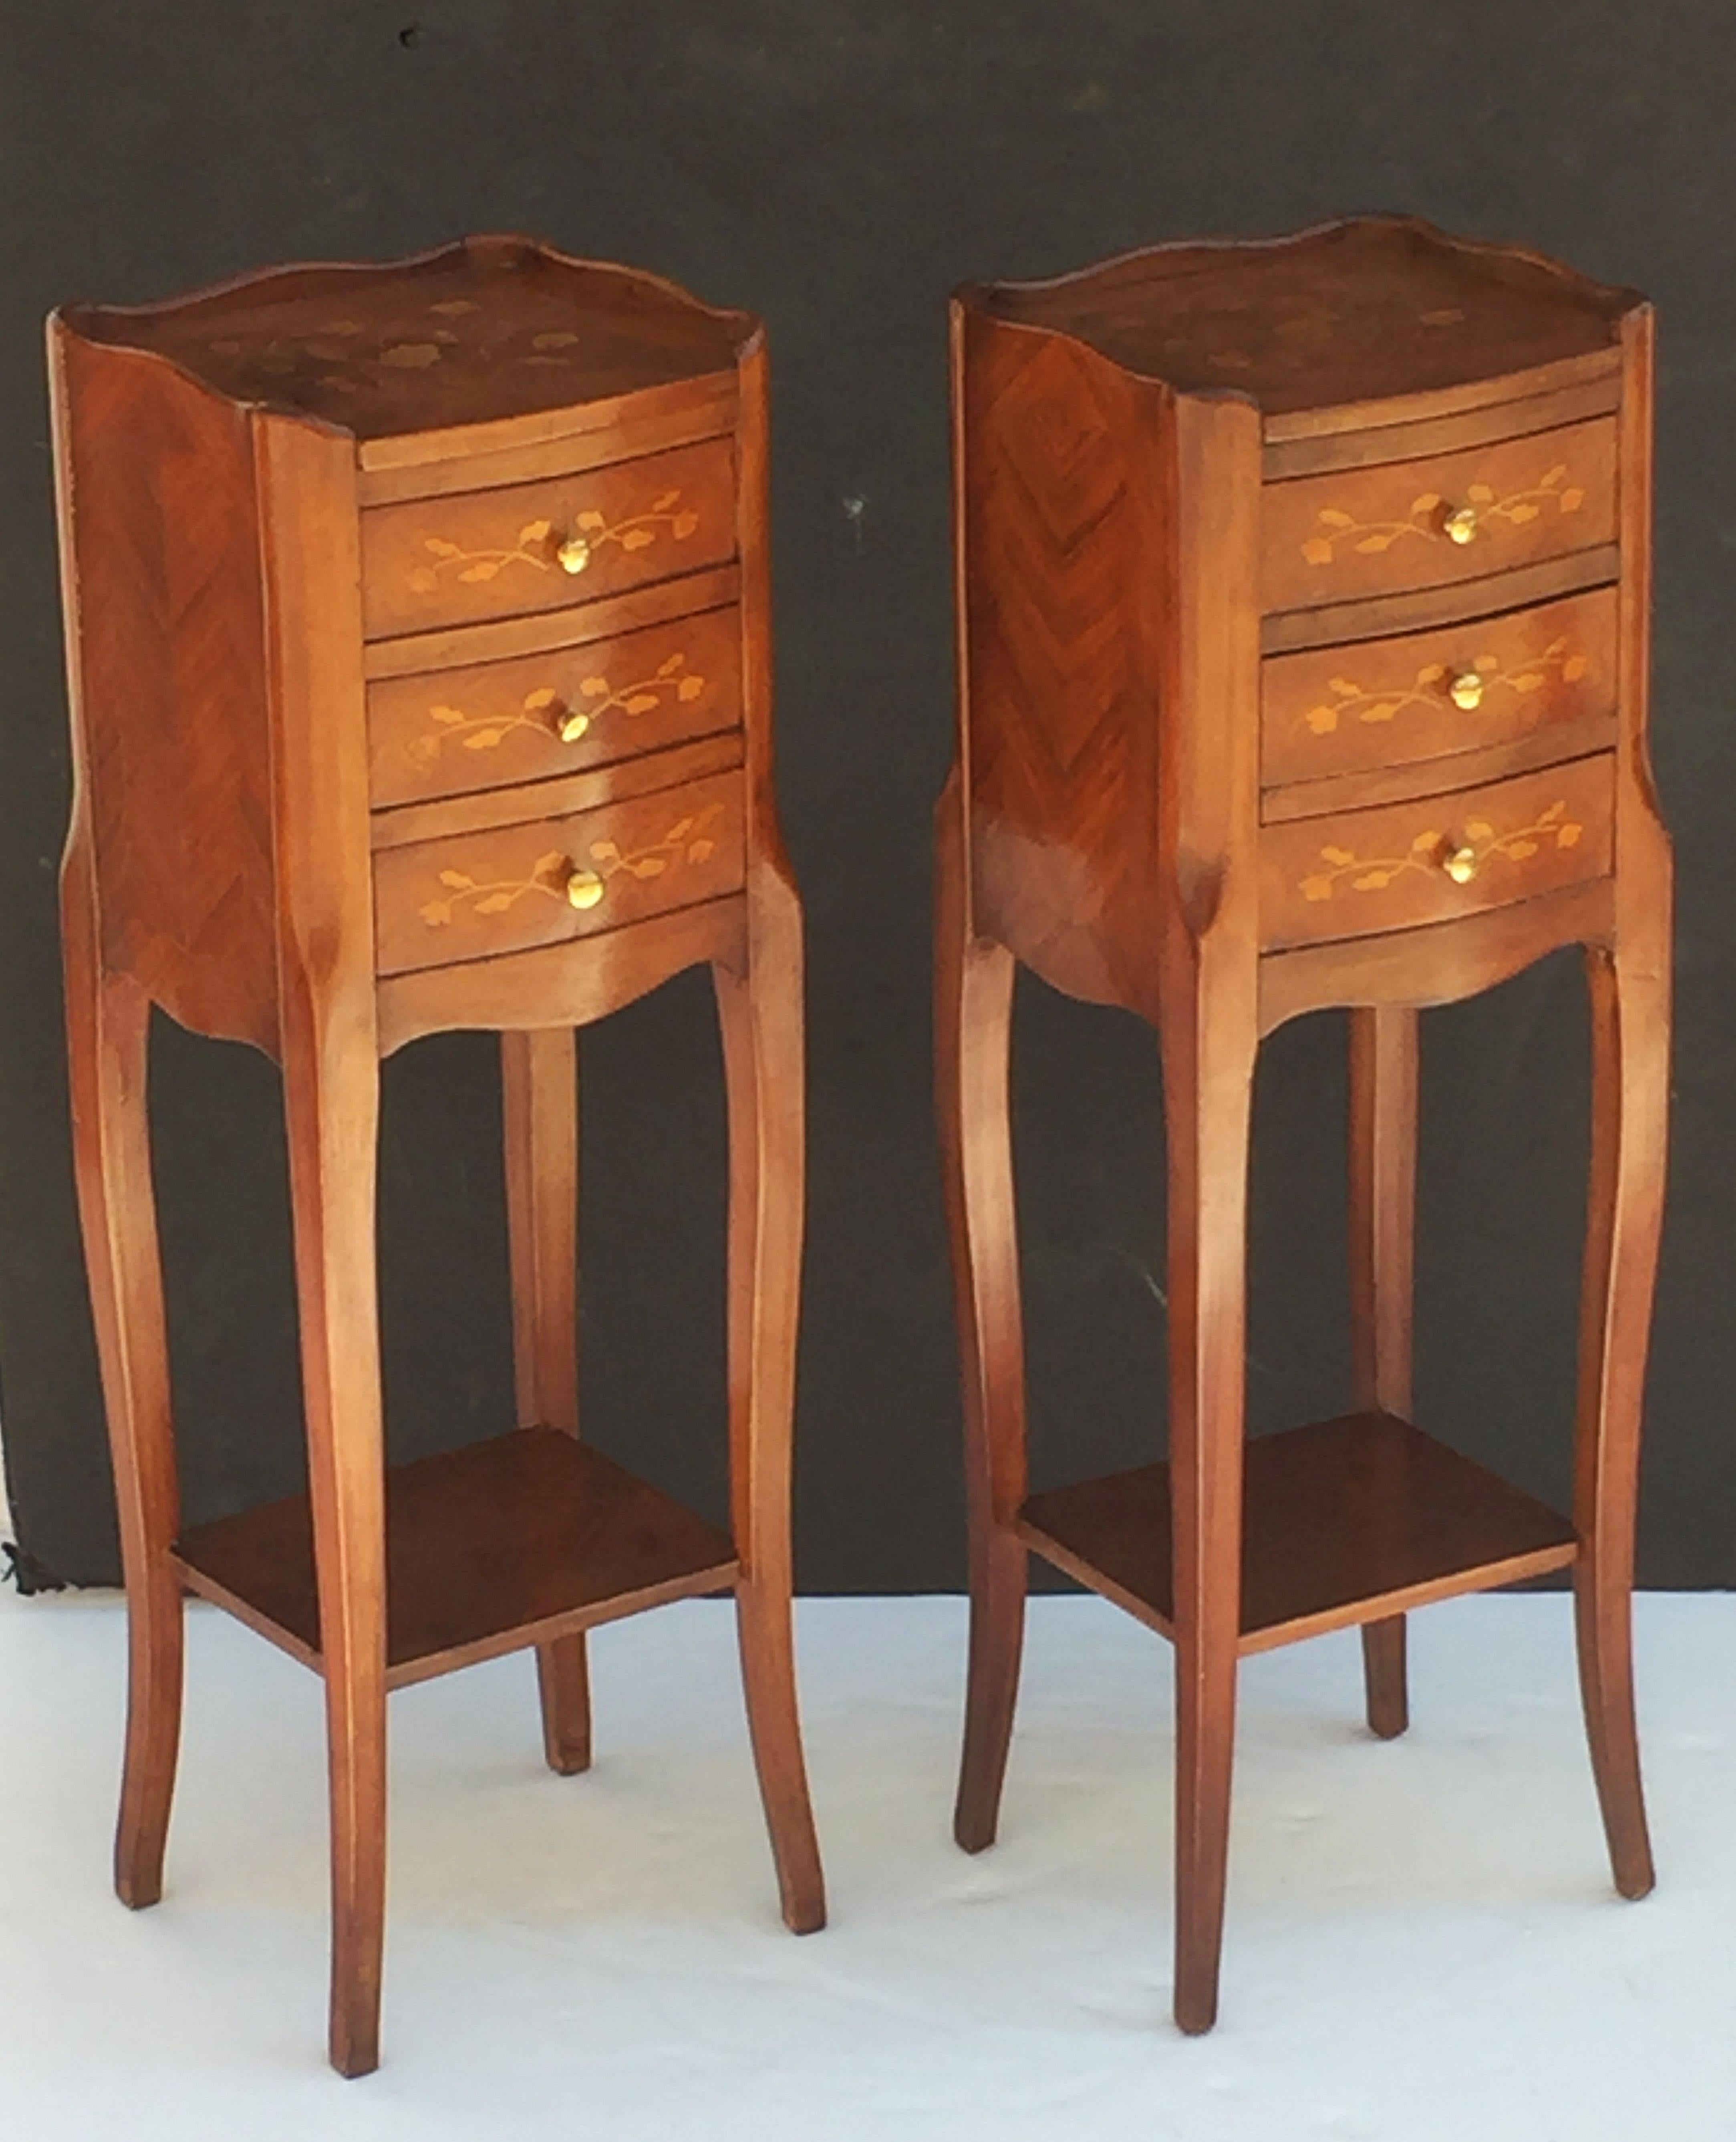 Inlay Pair of French Inlaid Nightstands or Bedside Tables